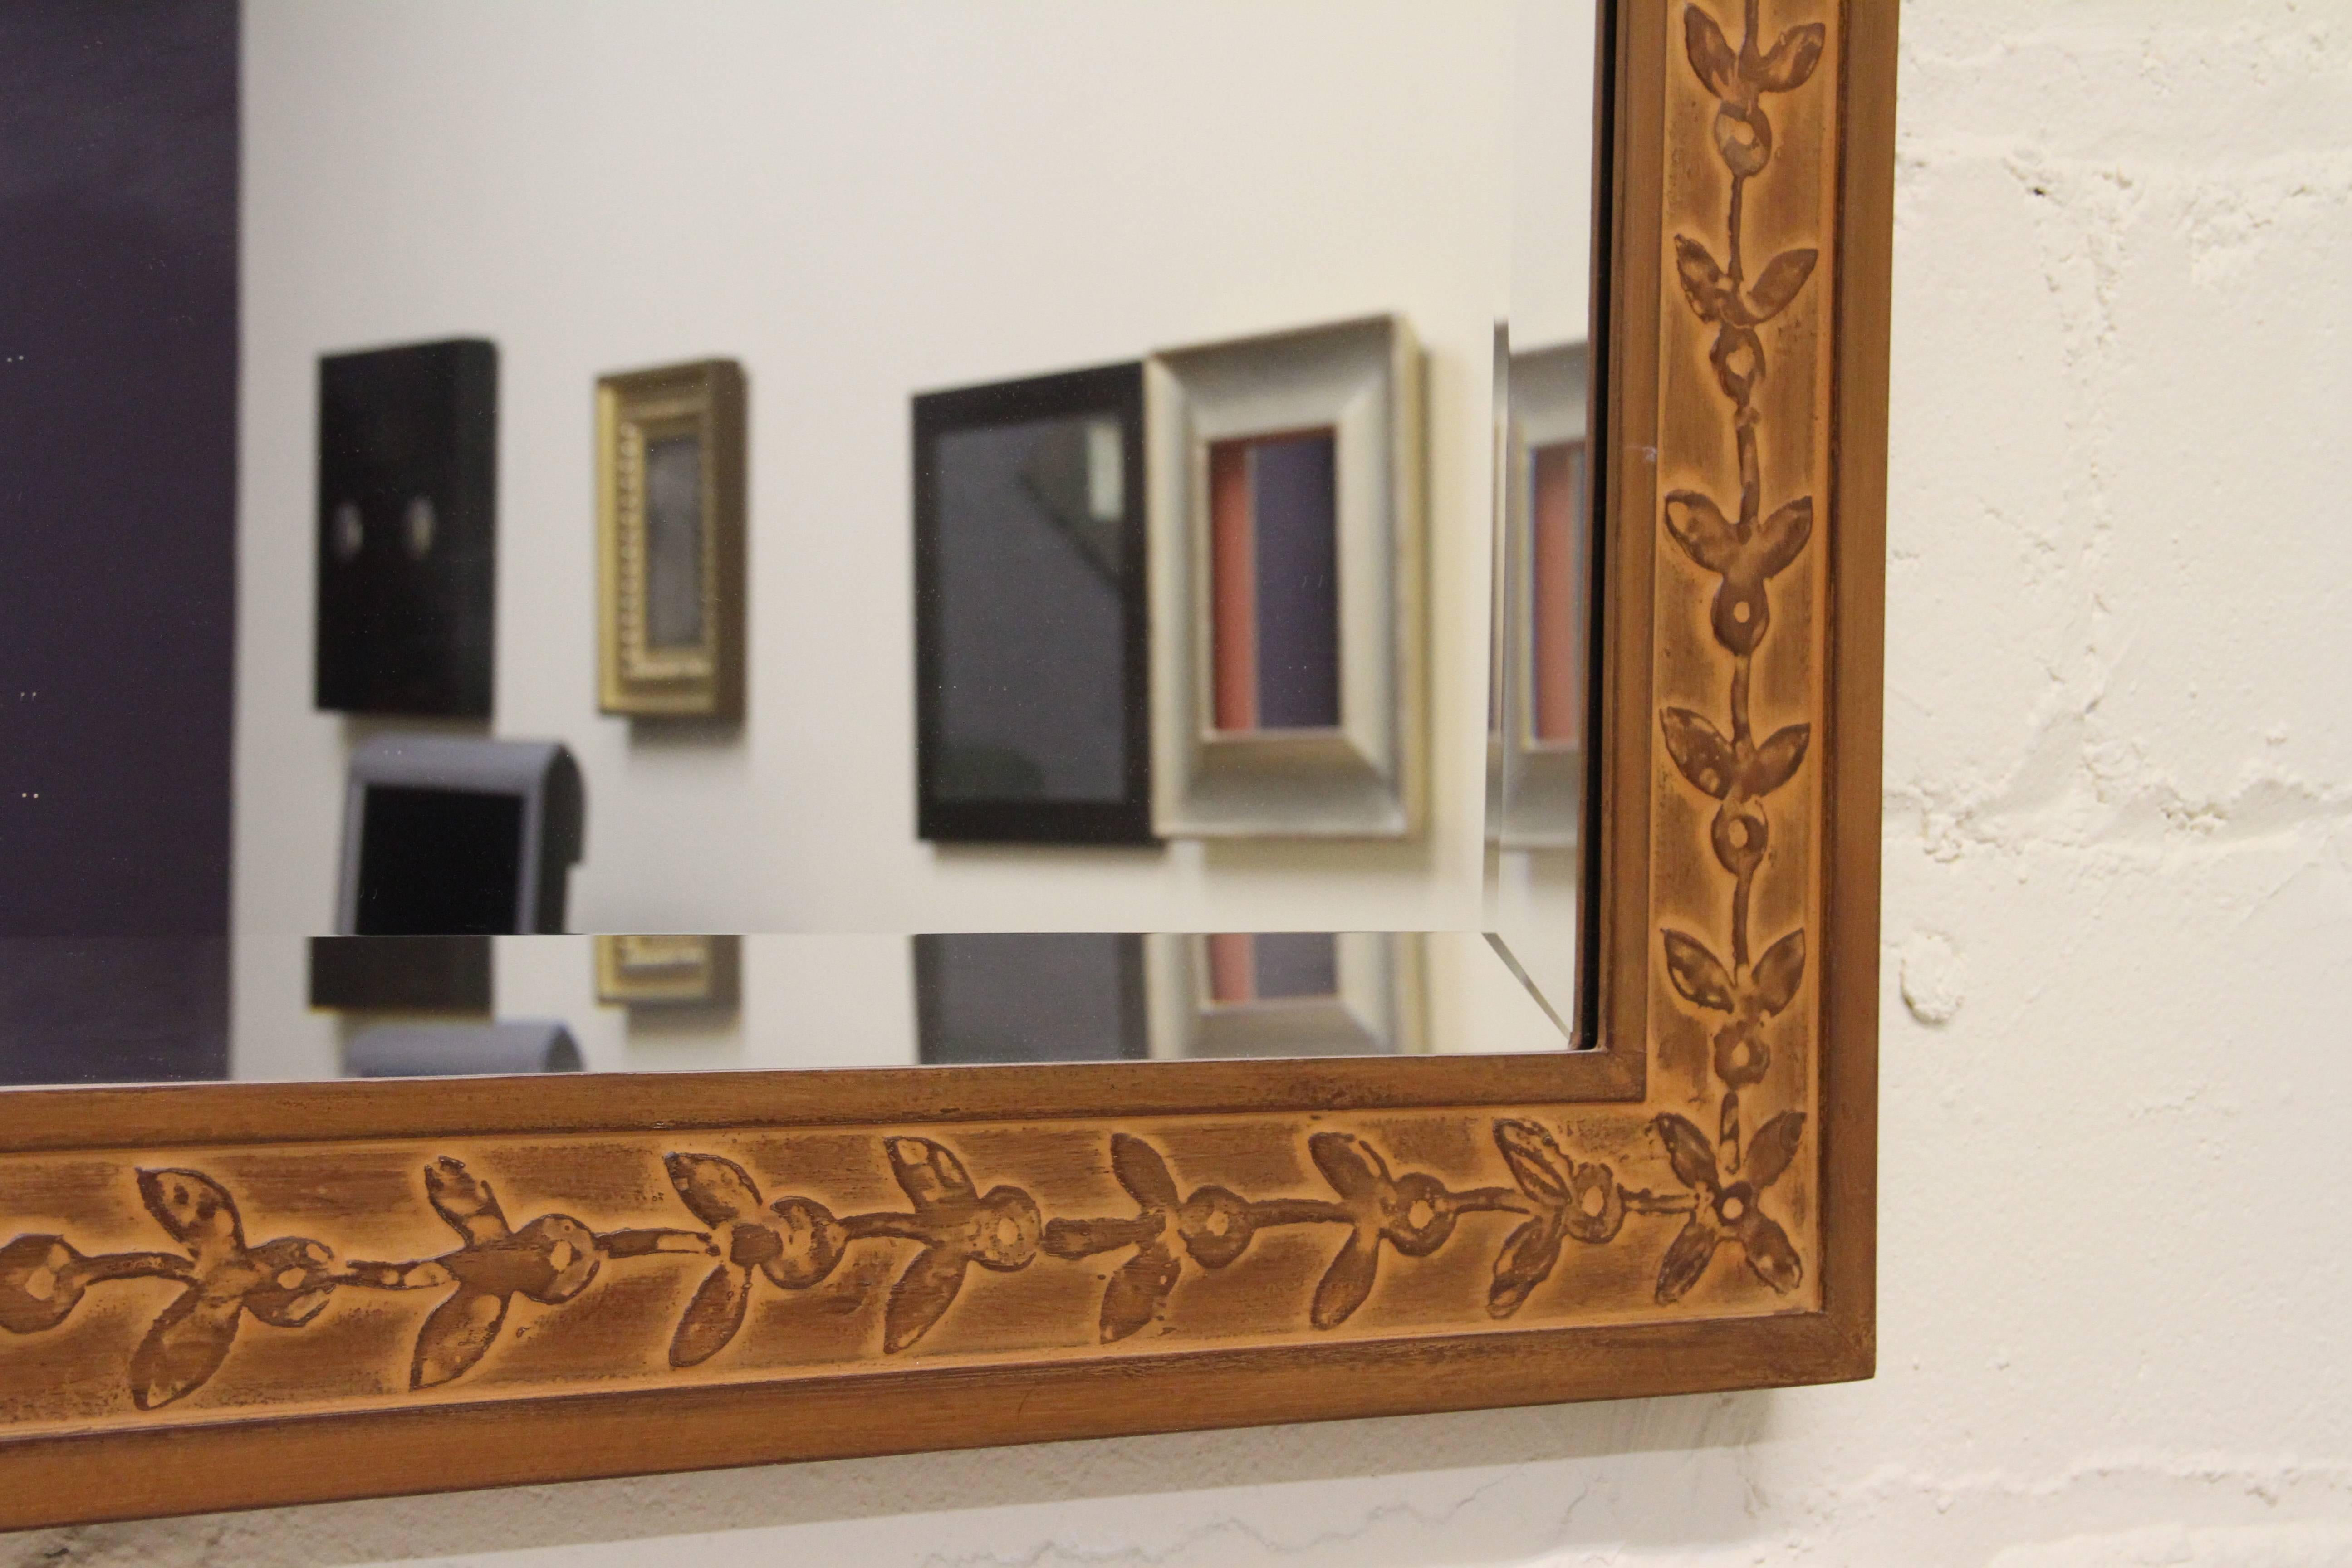 Hand-Crafted Bark Frameworks Nabi Wall Mirror with Custom Tile Print from Jozsef Rippl-Ronai For Sale